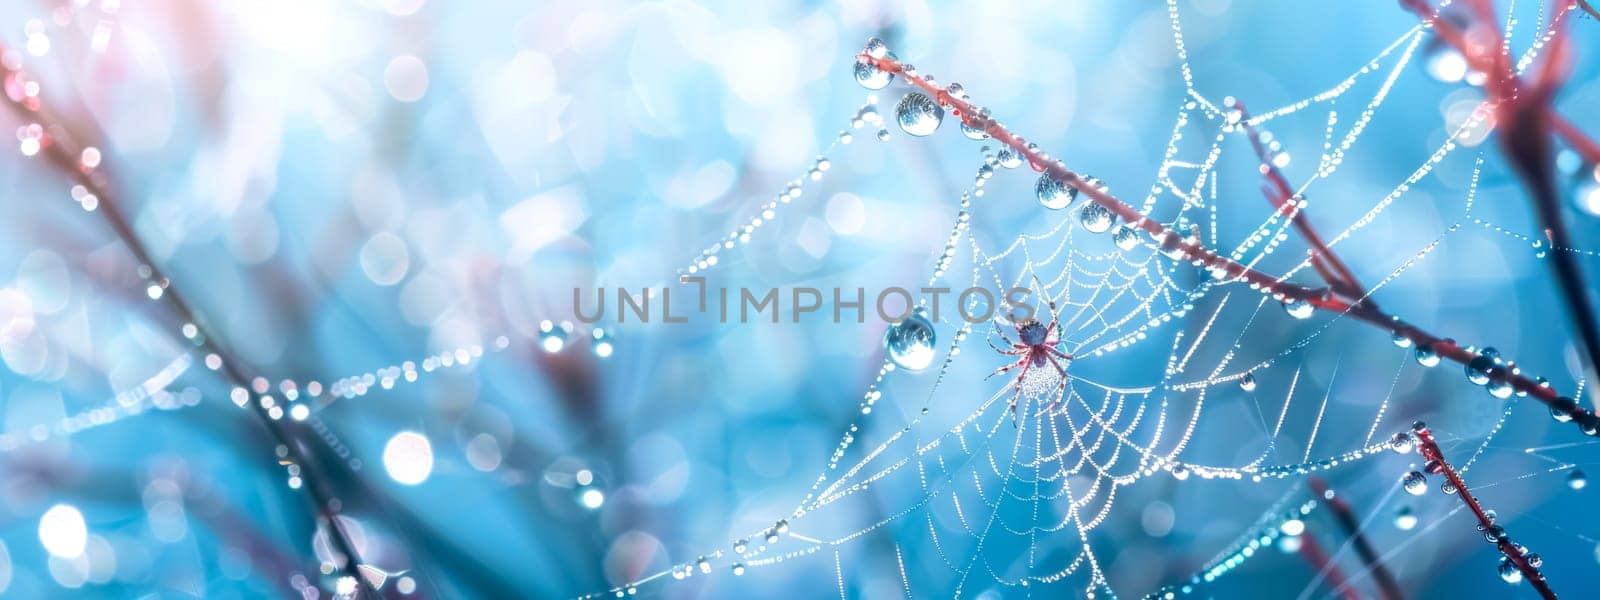 Close-up of a spiderweb glistening with dewdrops against a soft blue background by Edophoto